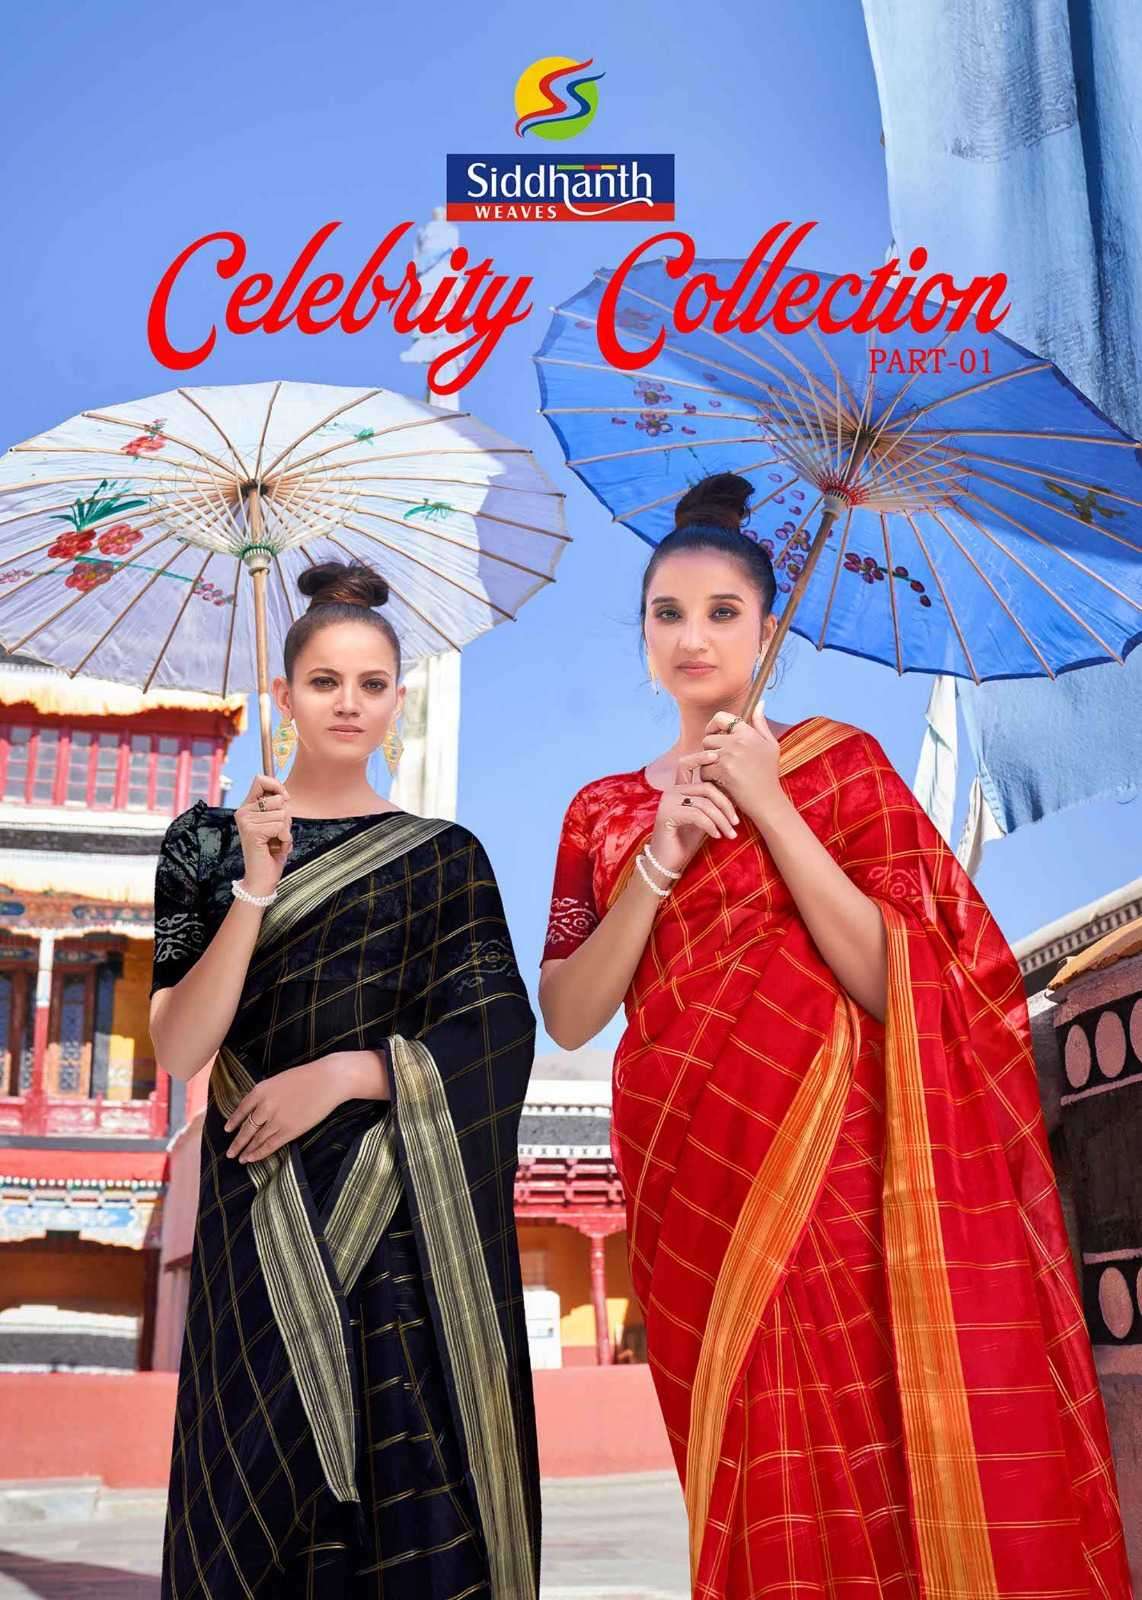 siddhanth weaves celebrity collection vol 1 series 52001-52008 cotton saree